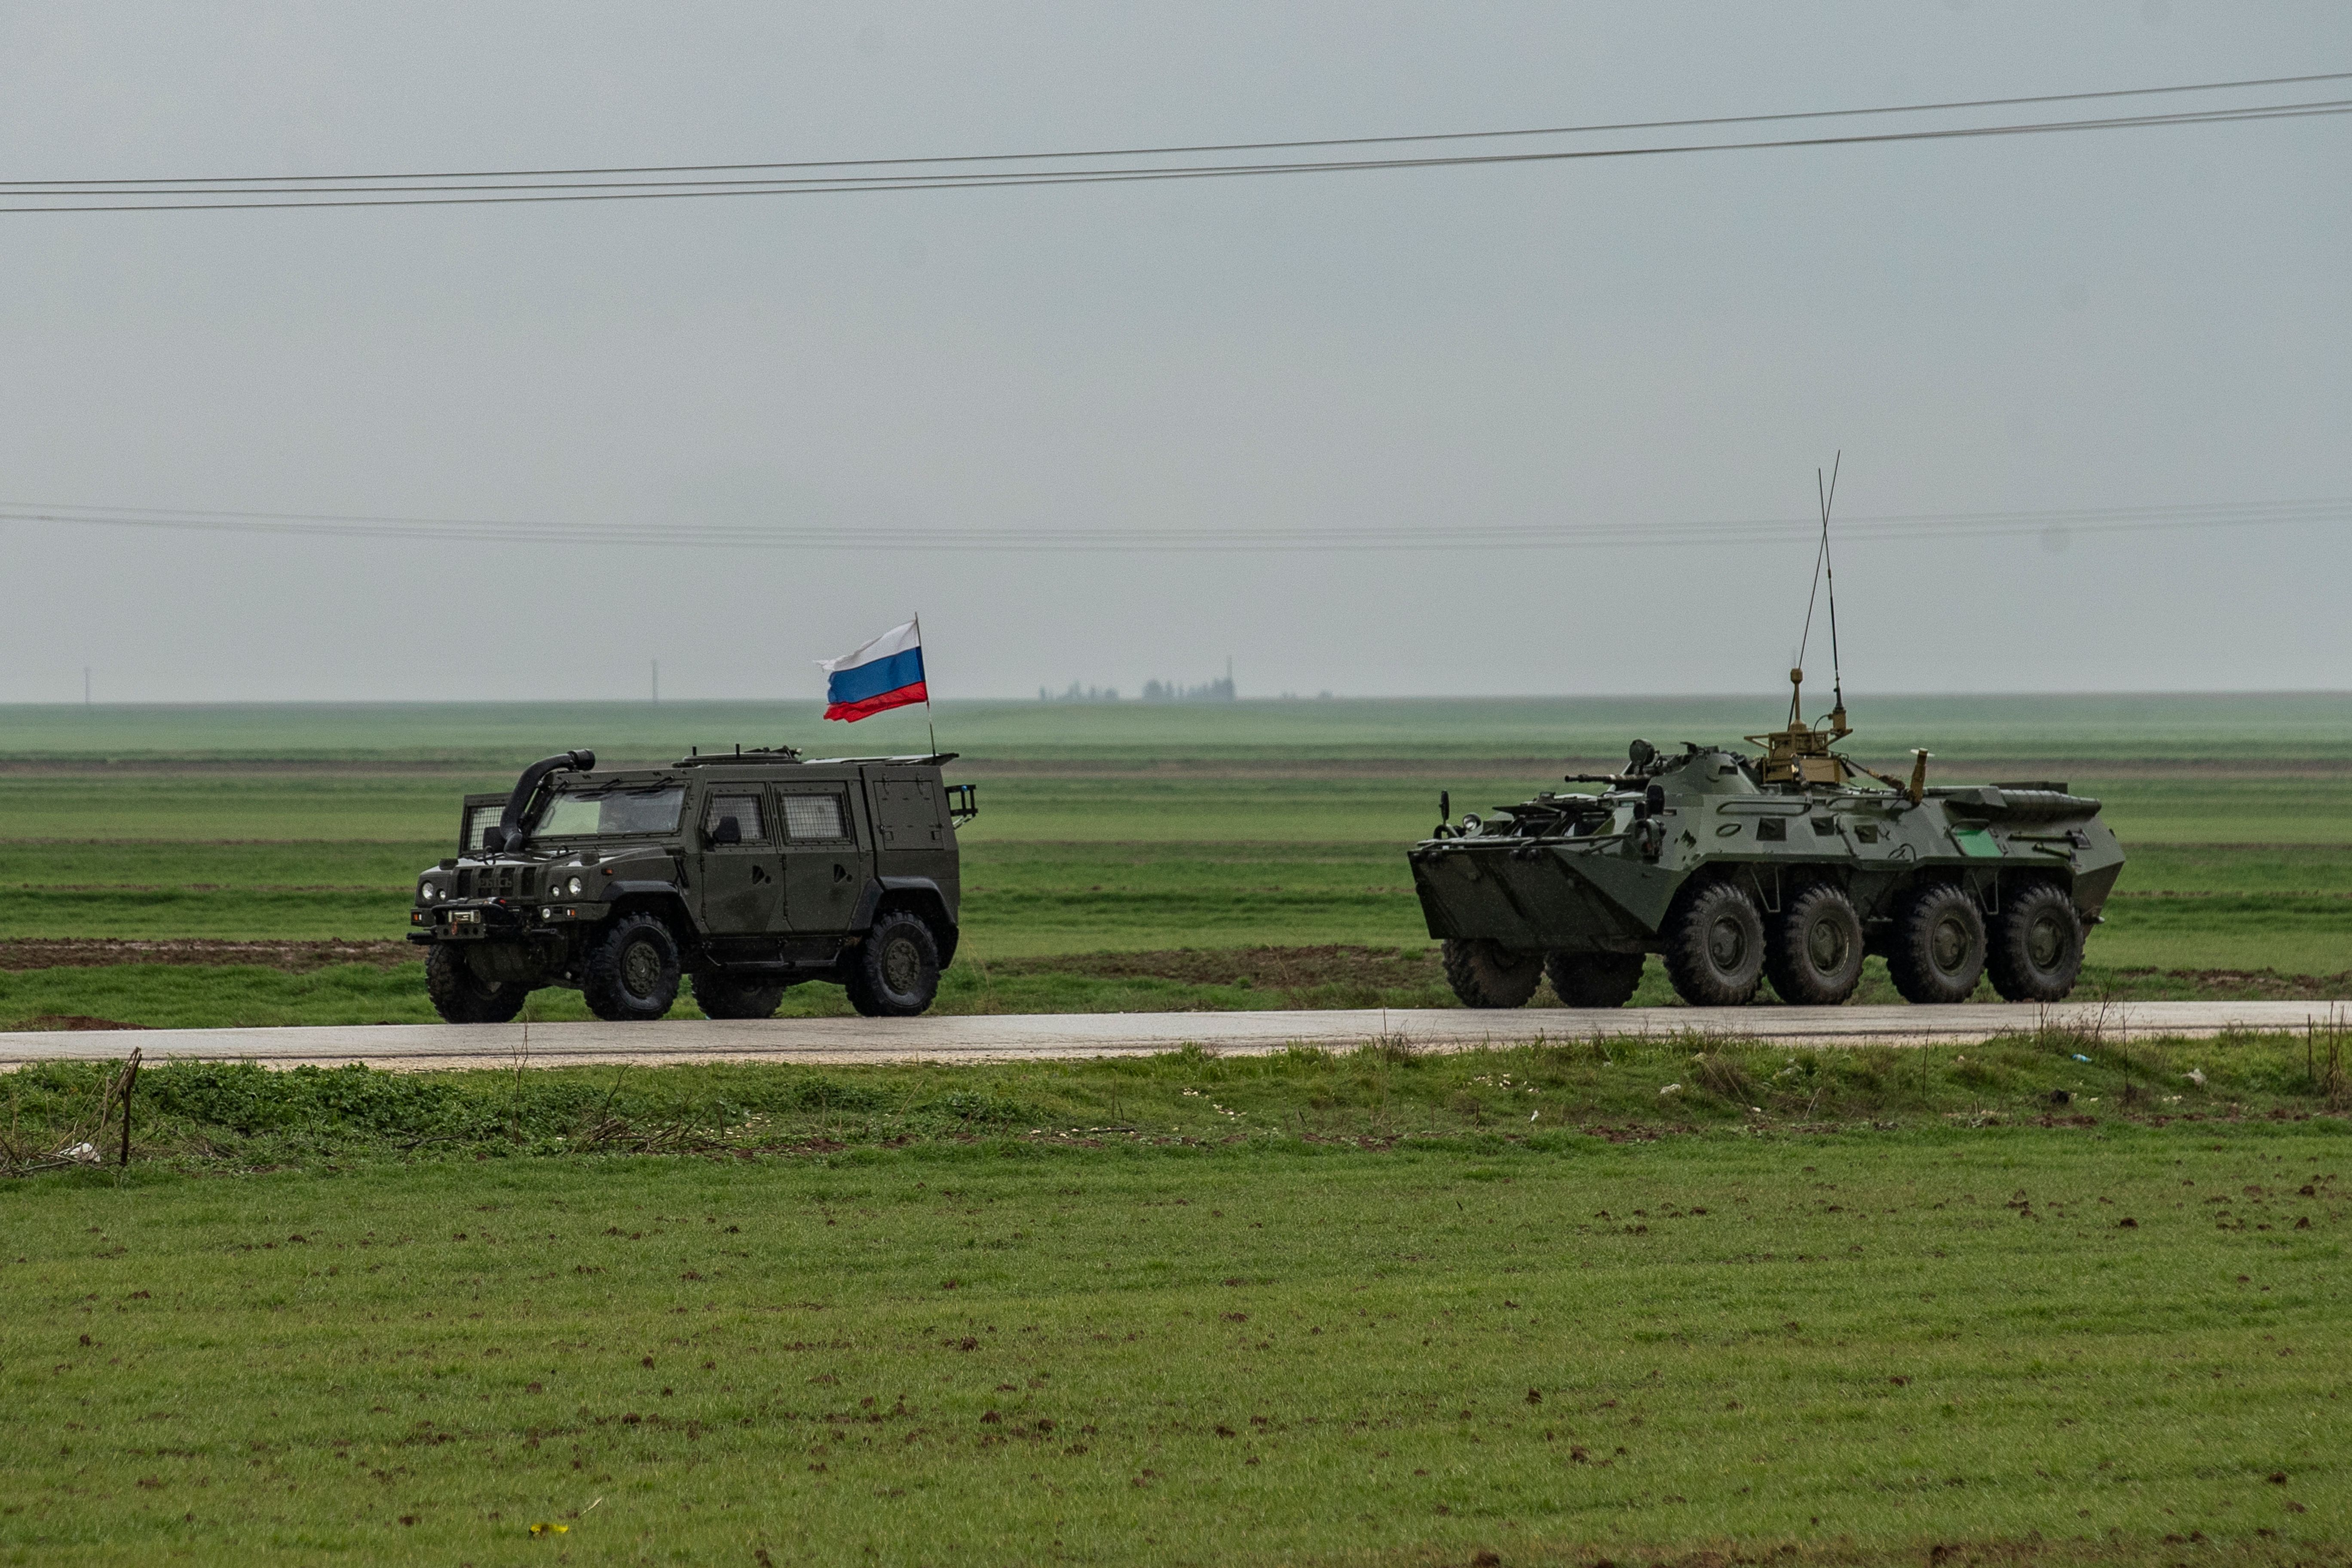 Russian military vehicles patrol the M4 highway in the northeastern Syrian Hasakeh province on the border with Turkey, on February 22, 2020. (Photo by DELIL SOULEIMAN/AFP via Getty Images)